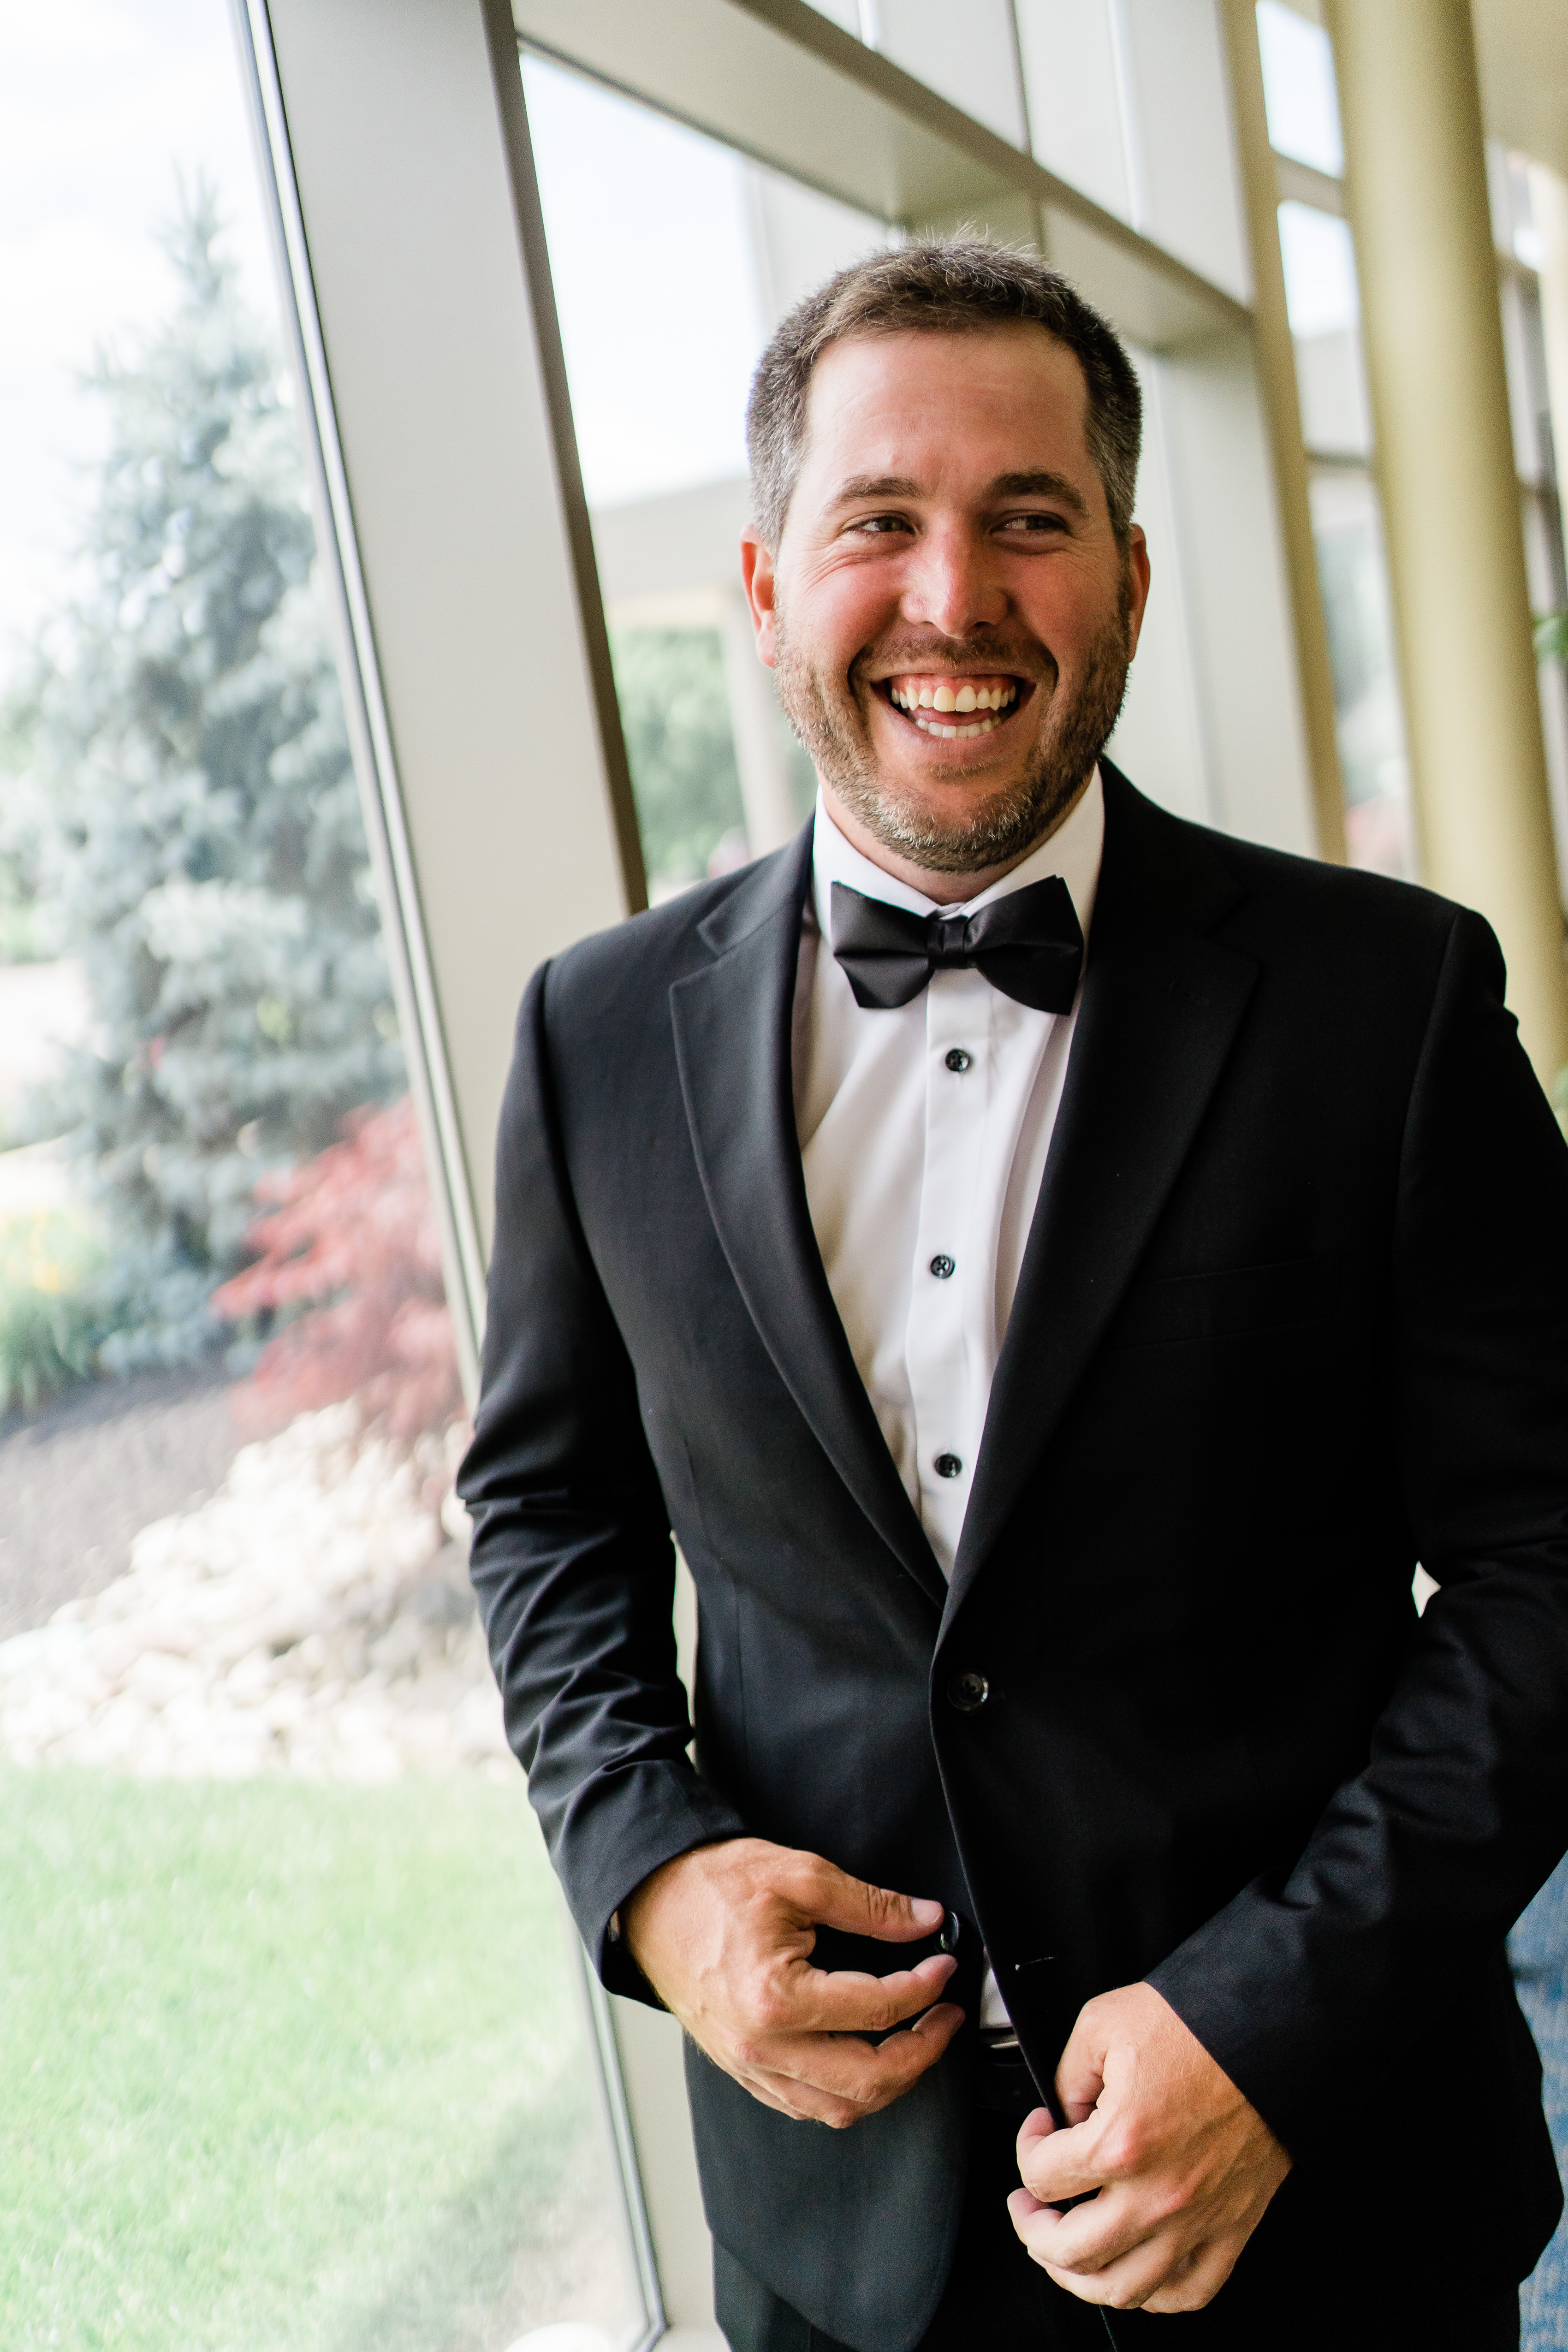 Indiana wedding photographer captures groom smiling while getting ready